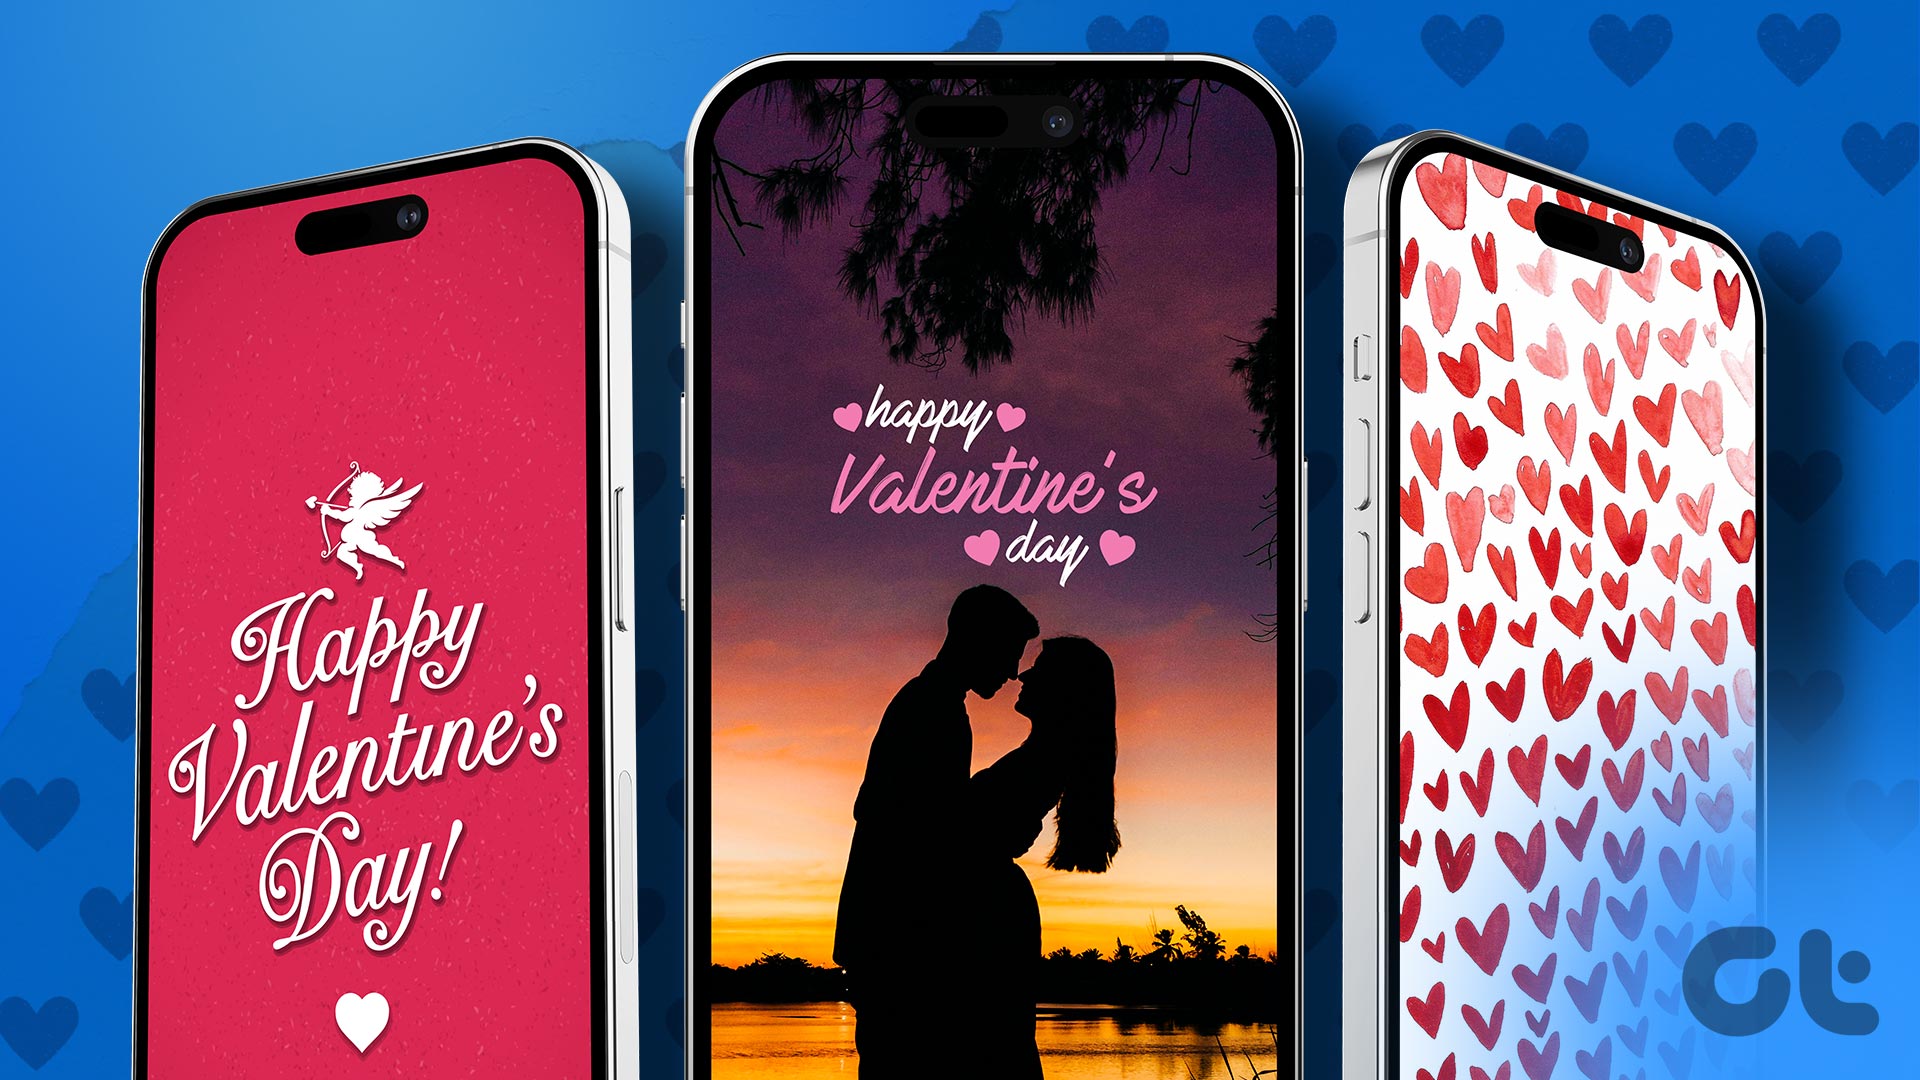 Free Valentine's day wallpaper for iPhone